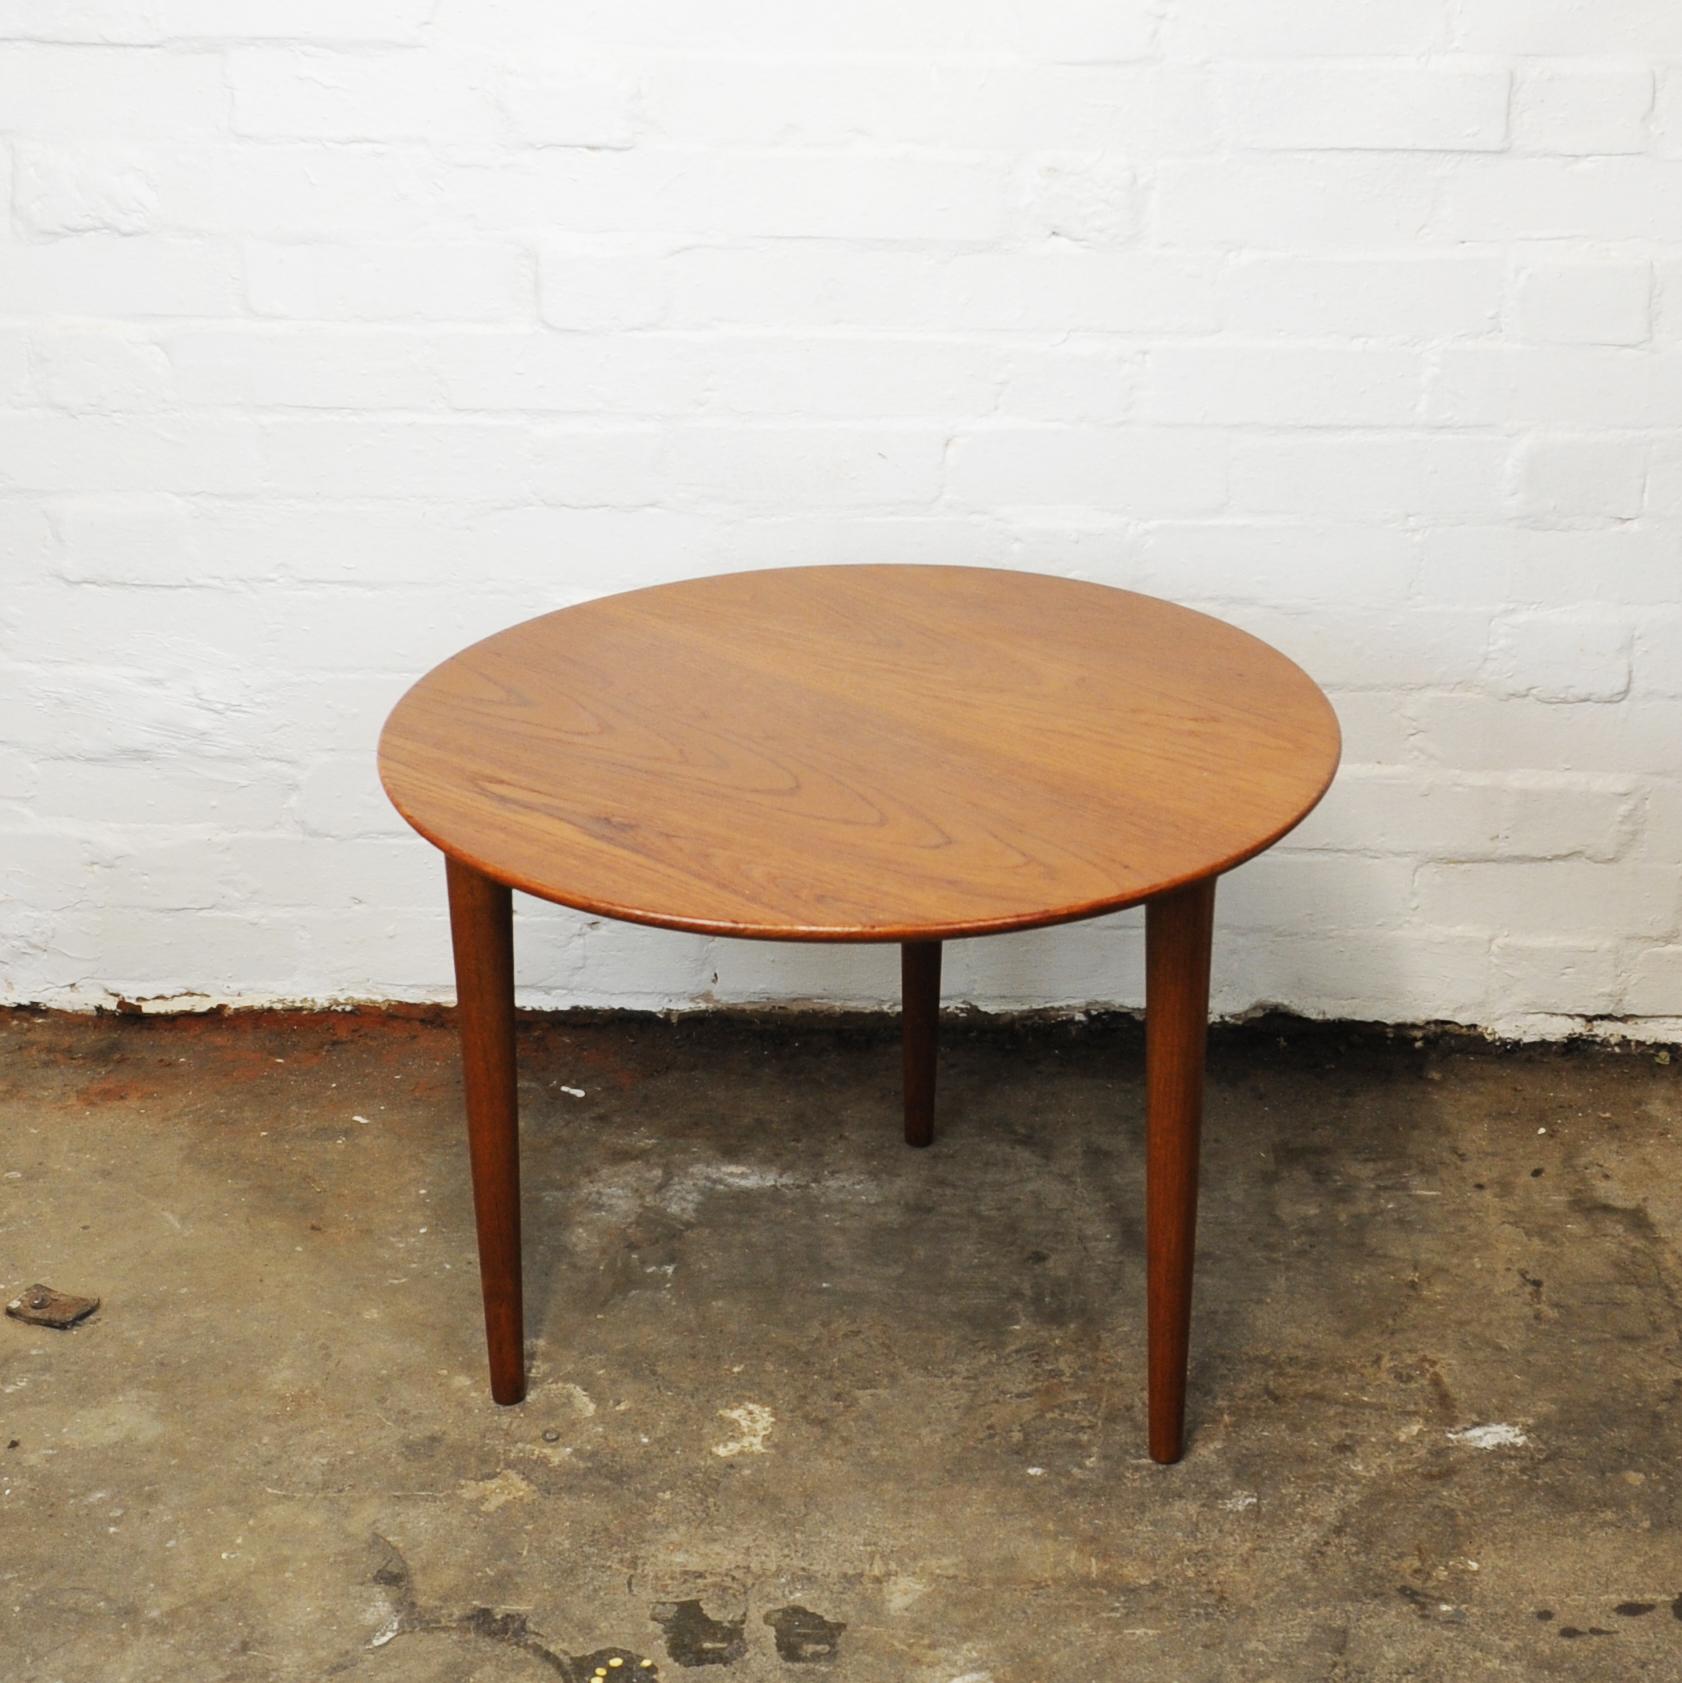 A 1960s teak round Norweigan coffee table which stands on three removable legs.

Manufacturer - Norsk Design Ltd

Design Period - 1960 to 1969

Country of Manufacture - Norway

Style - Mid-Century

Detailed Condition - Good with minimal